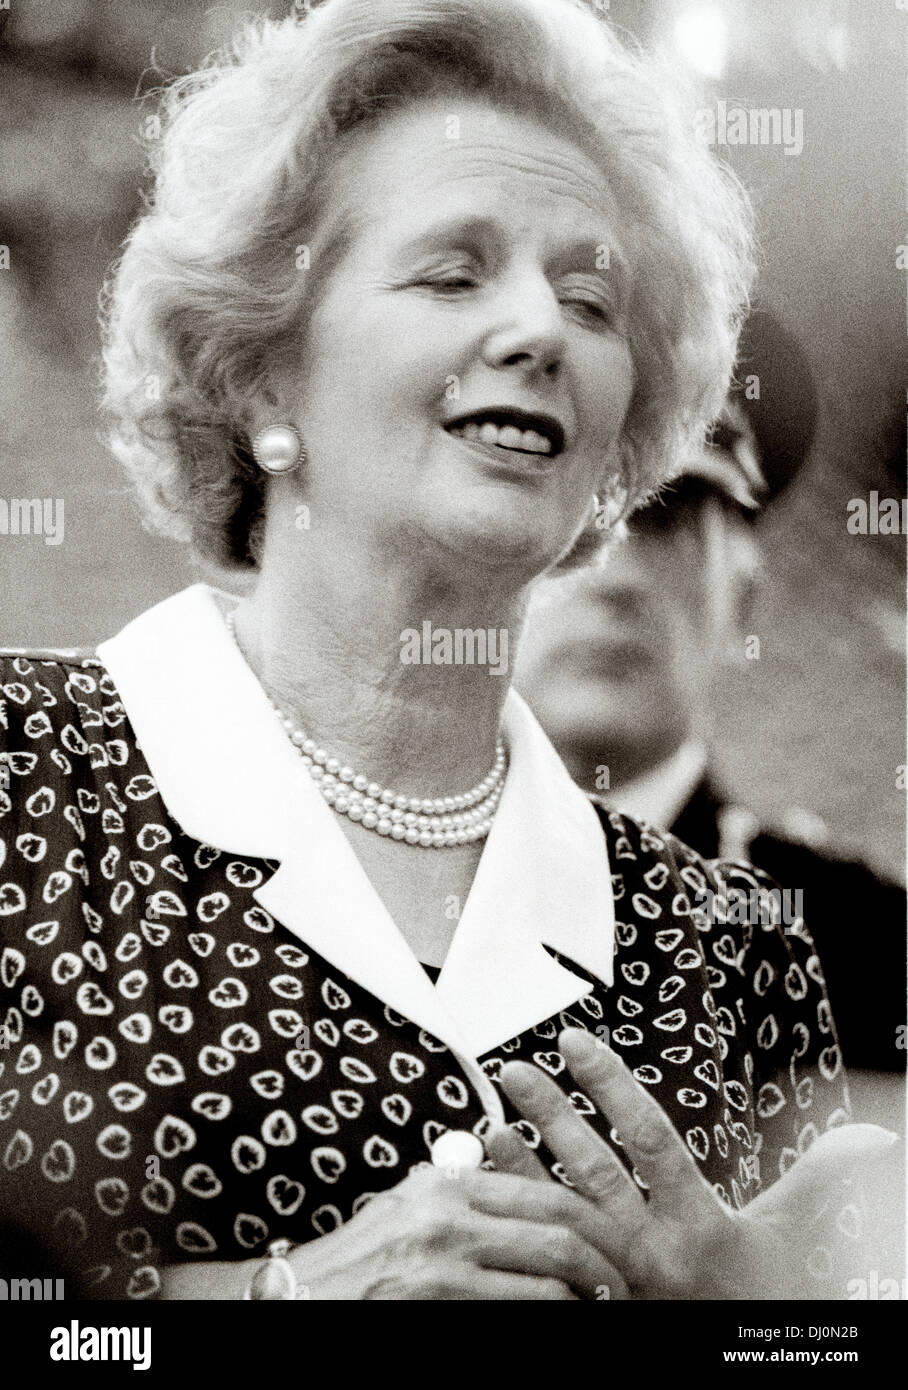 Former Conservative or Tory MP and Prime Minister Margaret Thatcher. Politician and former Member of Parliament Stock Photo